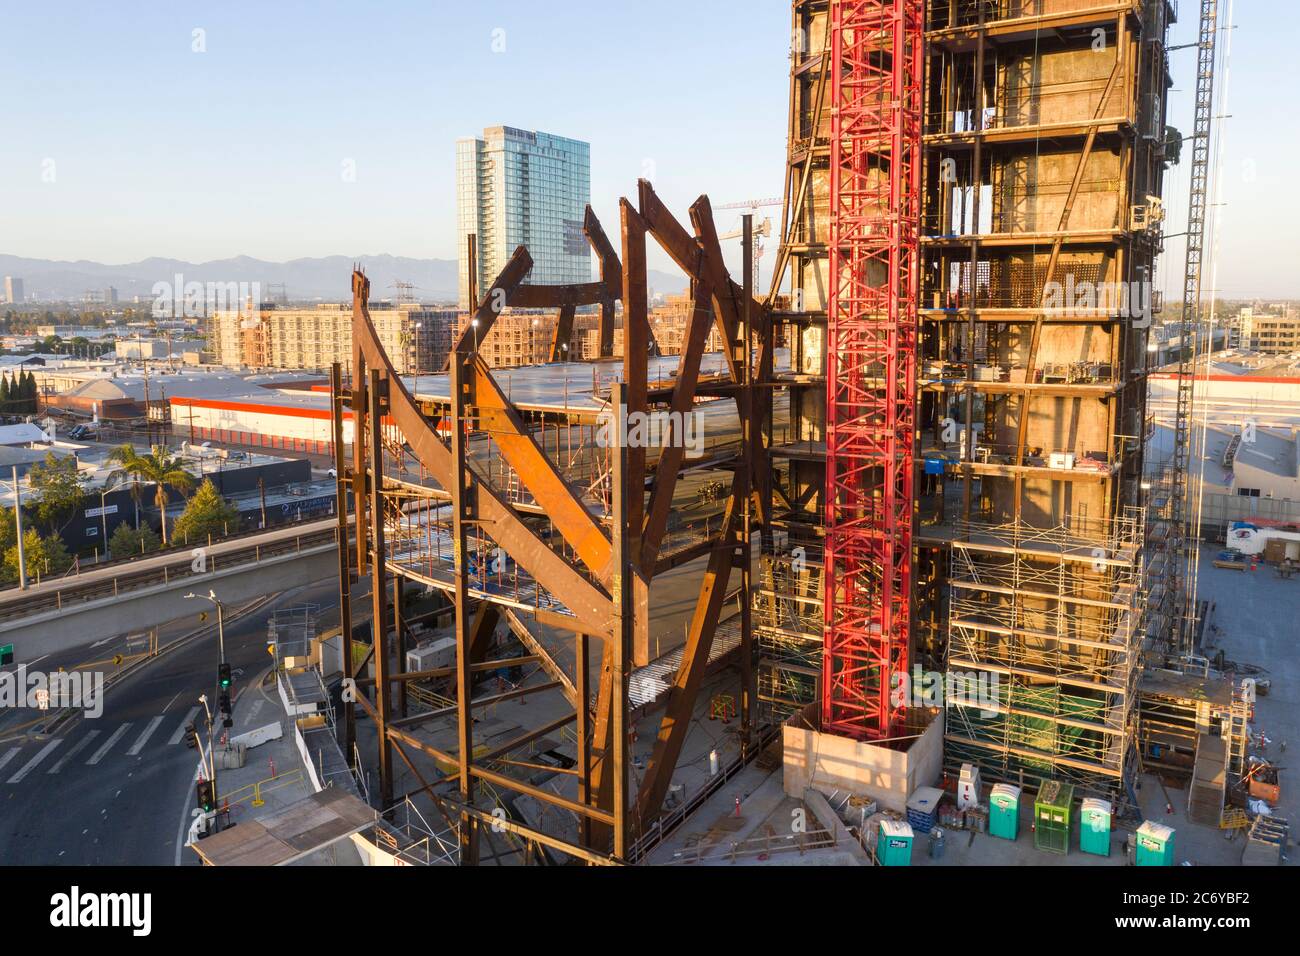 (W)rapper tower with its curved structural exoskeleton by architect Eric Owen Moss under construction in Los Angeles (Wrapper) Stock Photo